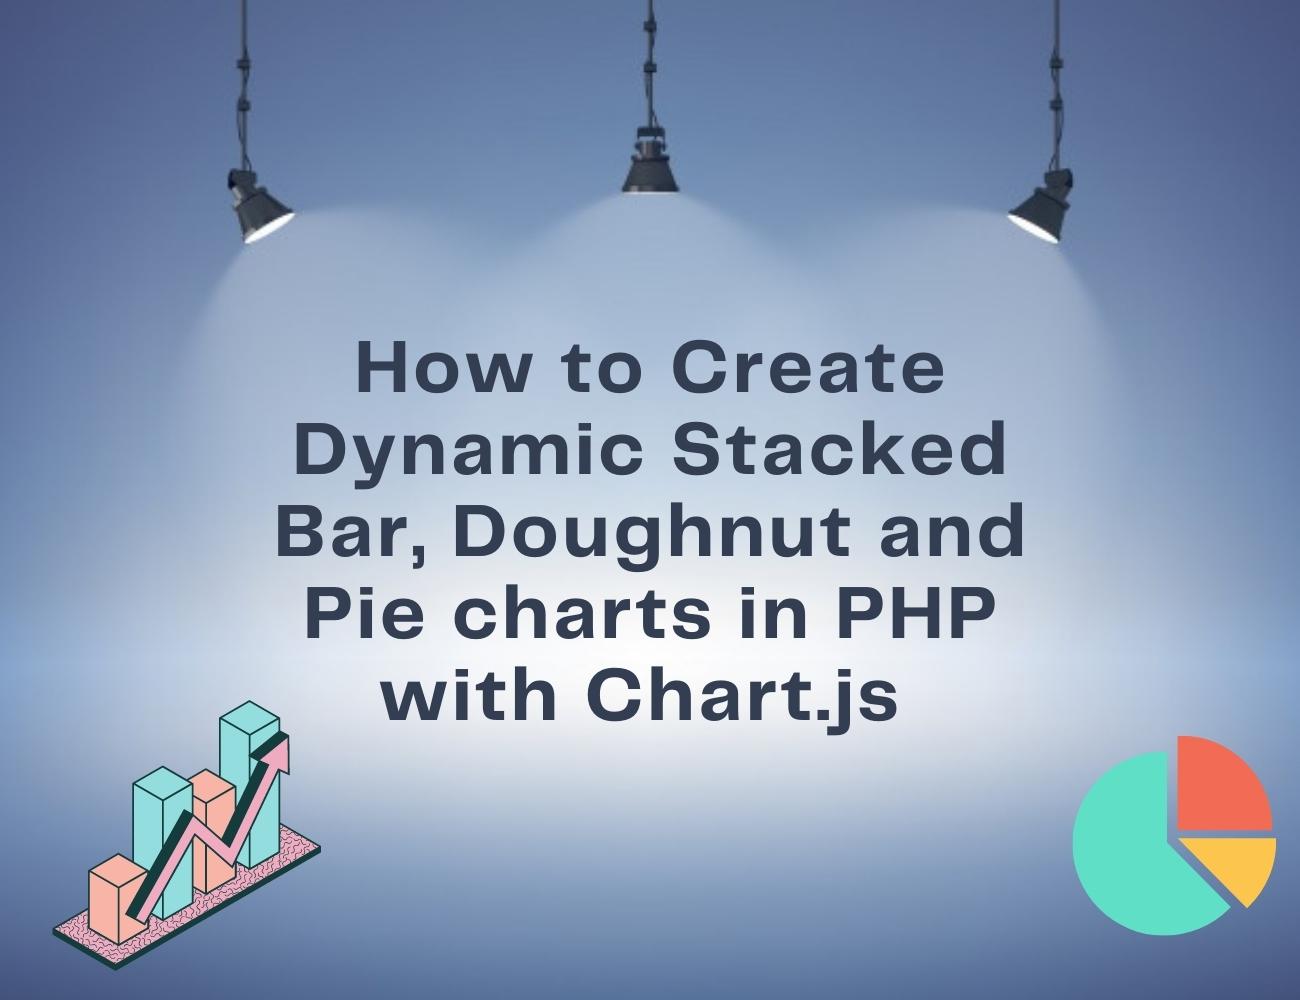 How to Create Dynamic Stacked Bar, Doughnut and Pie charts in PHP with Chart.js